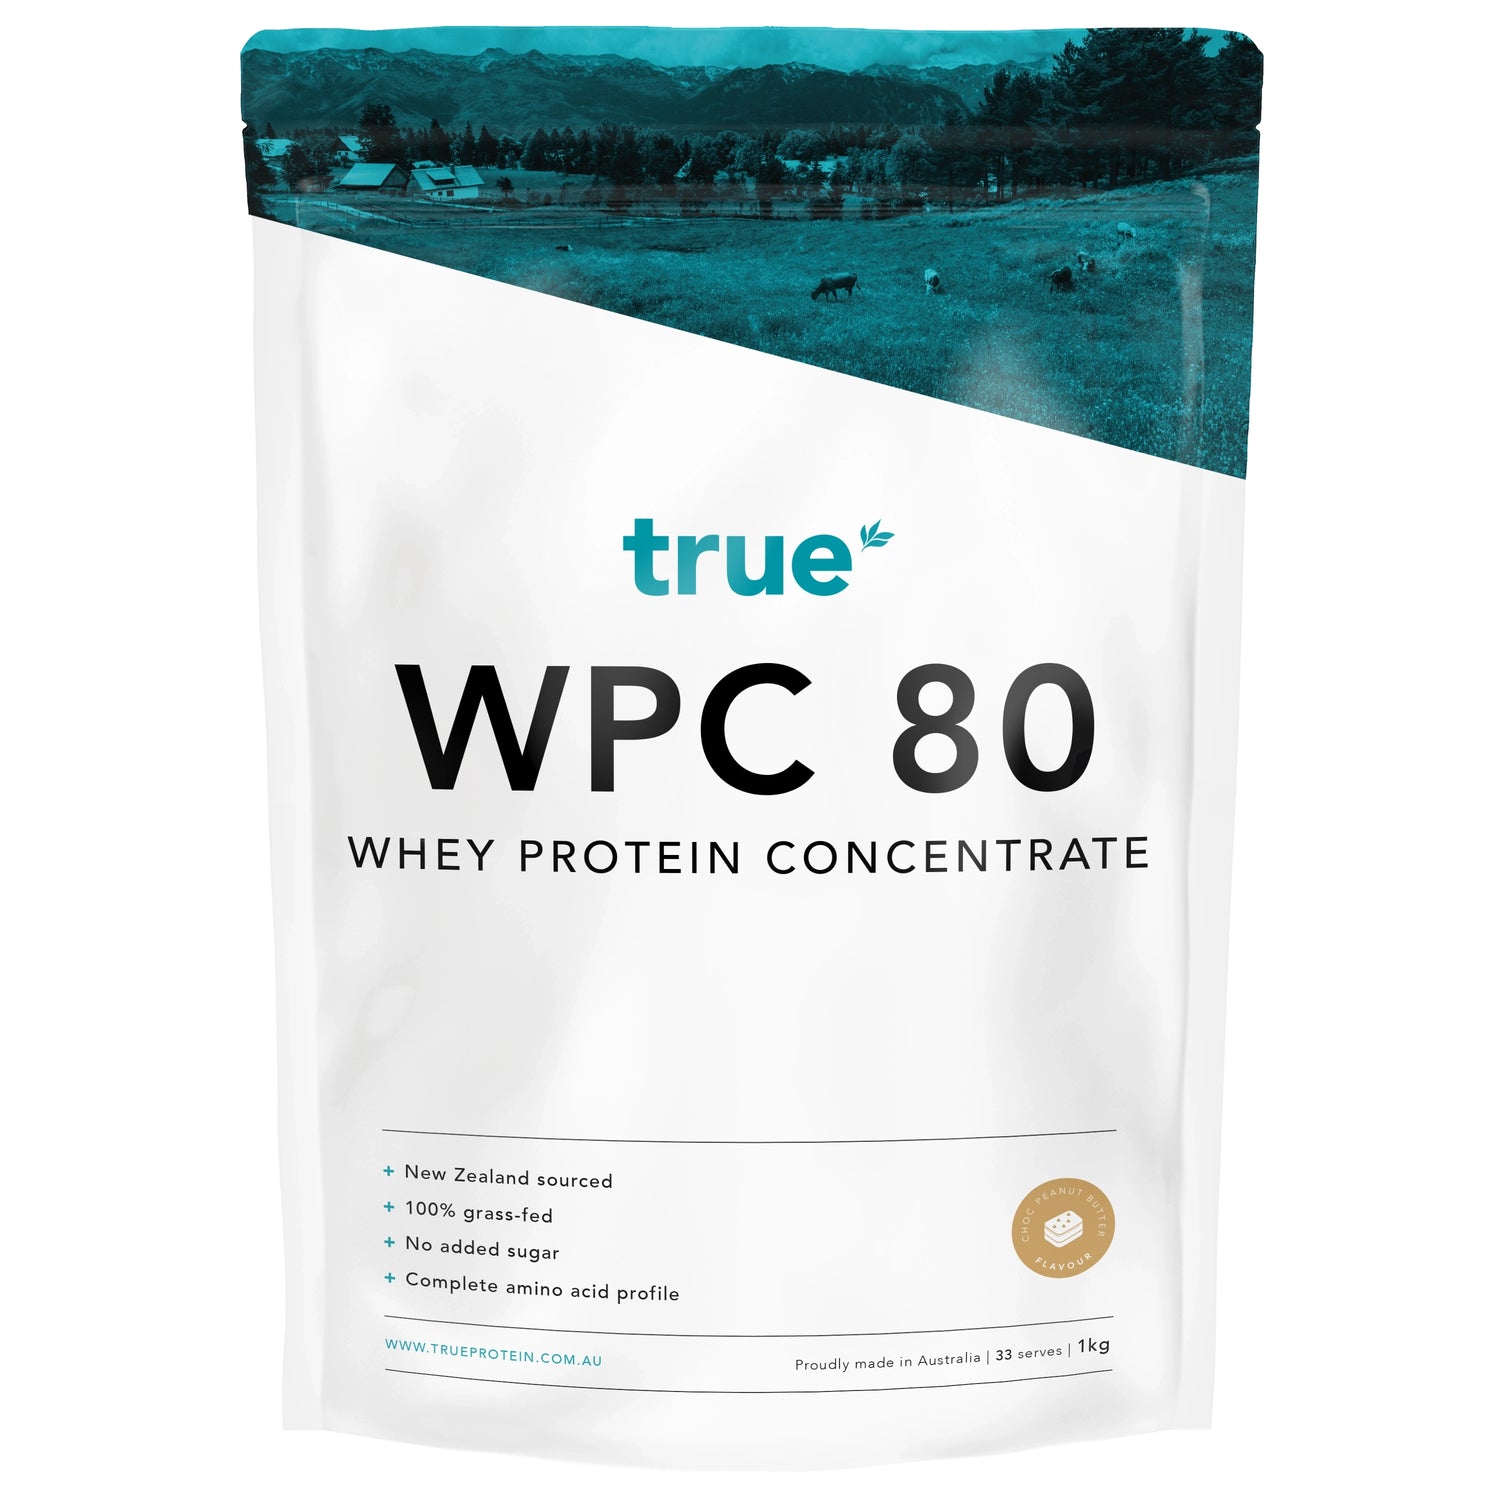 WPC80